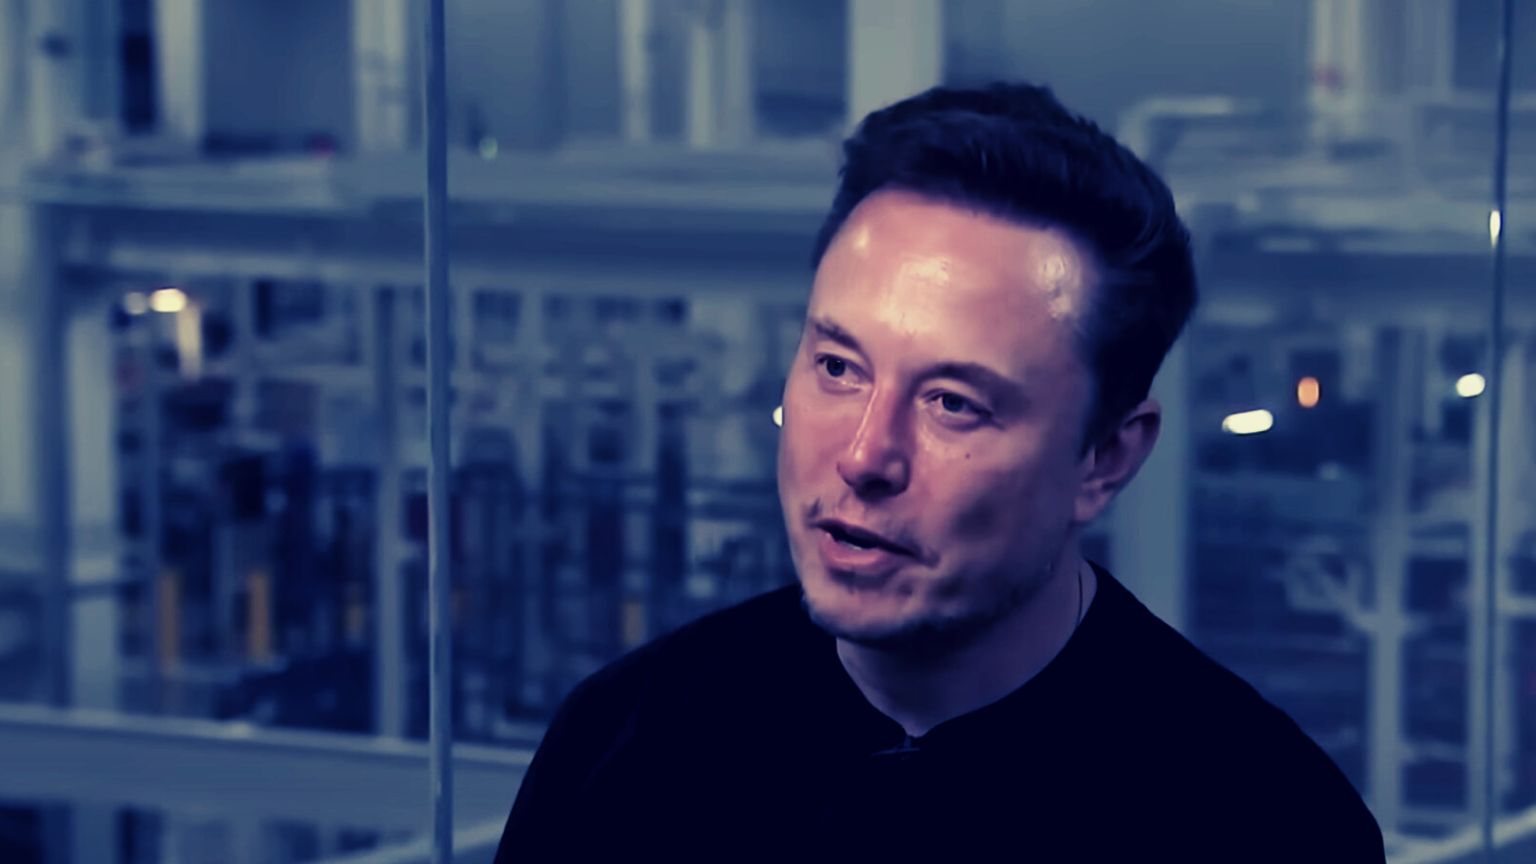 Musk Says Twitter Has “No Actual Choice” But Comply With Government Censorship Demands